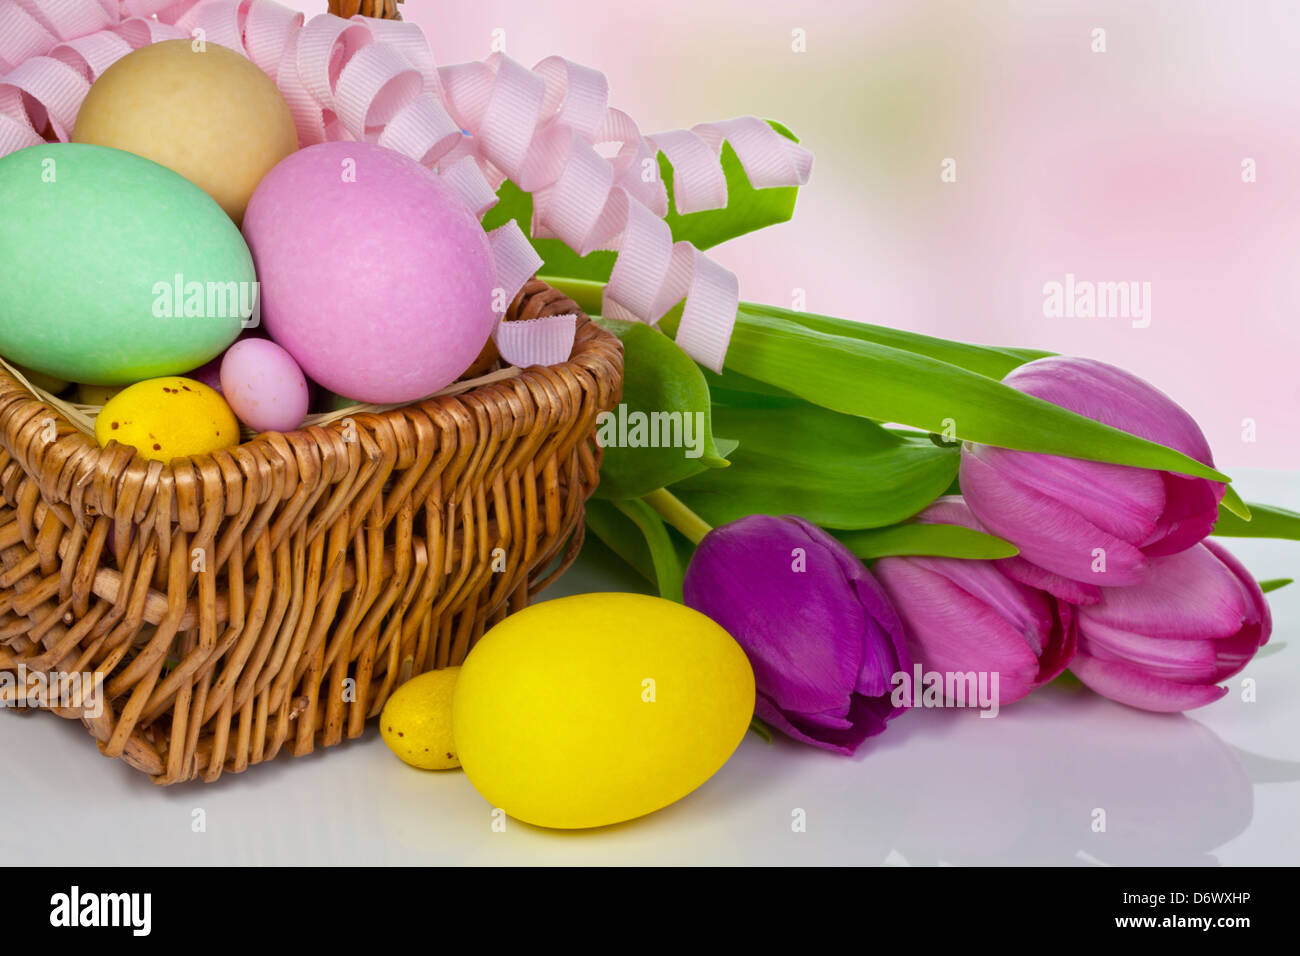 Large and small different colour Easter eggs in a basket. Stock Photo